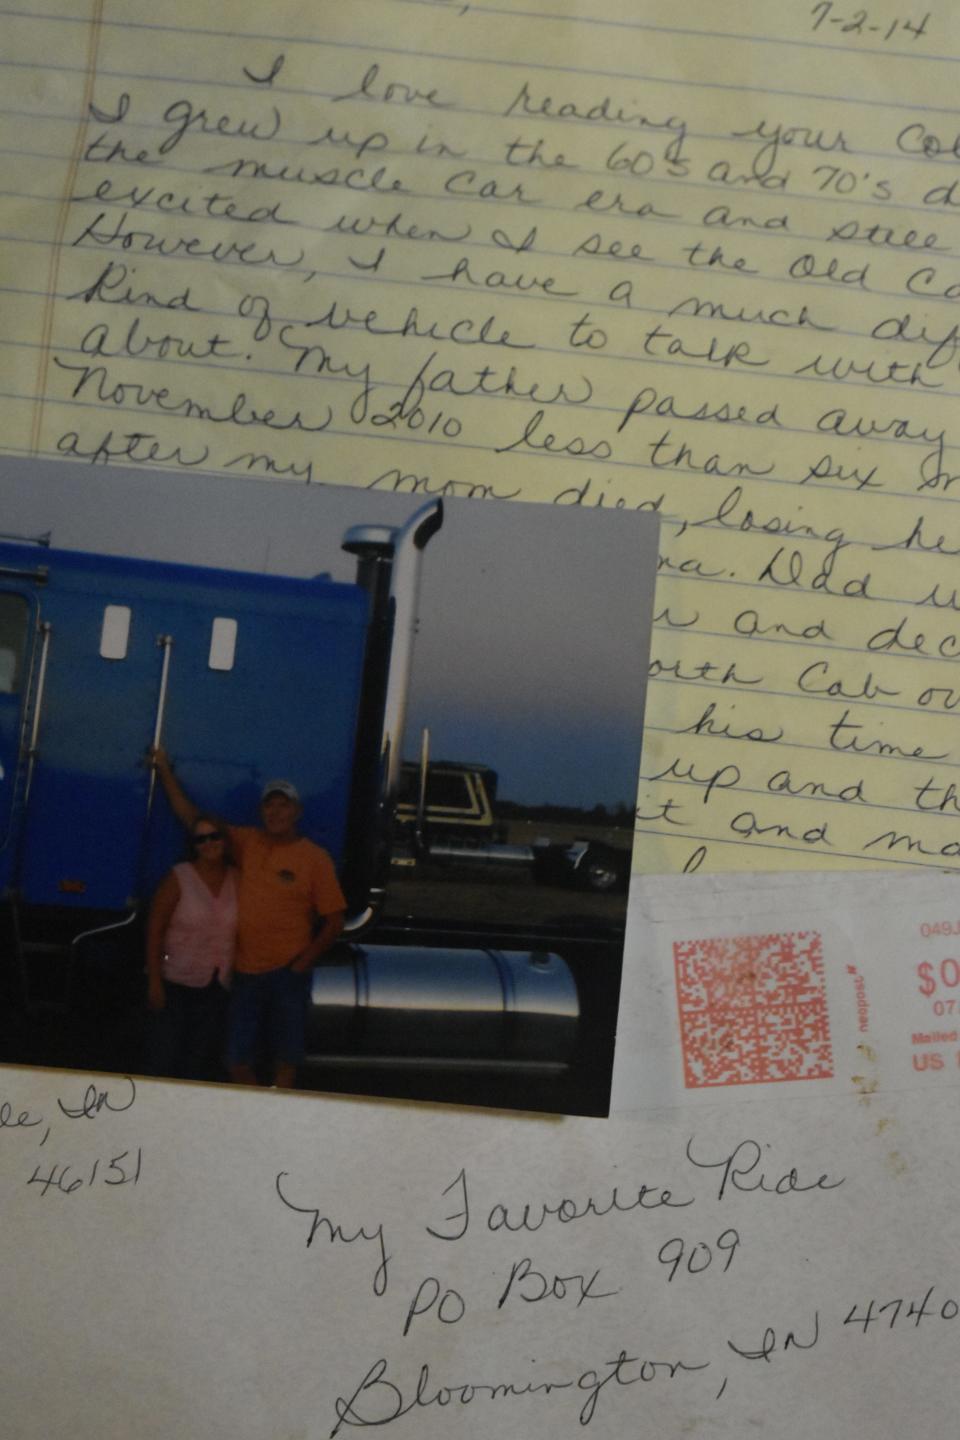 This letter and photo arrived in the mail in 2014. A decade later, the story became a My Favorite Ride column.